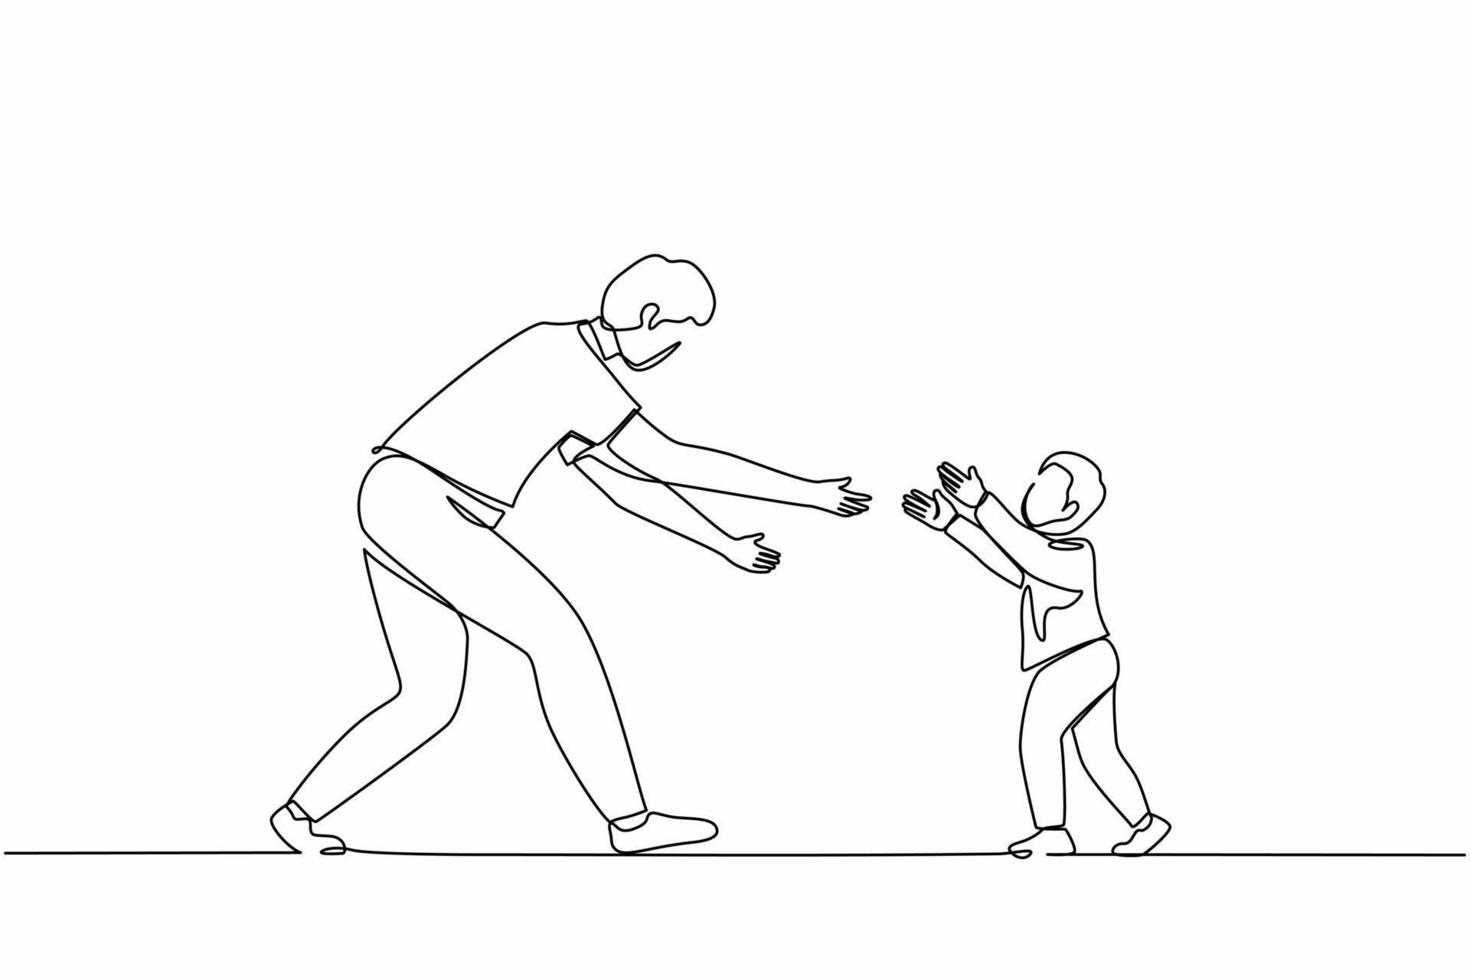 Continuous one line drawing little boy running to his dad. Child happy to greet dad returning home from business trip. Dad stretching hands to son. Cheerful kid and parent. Single line design vector